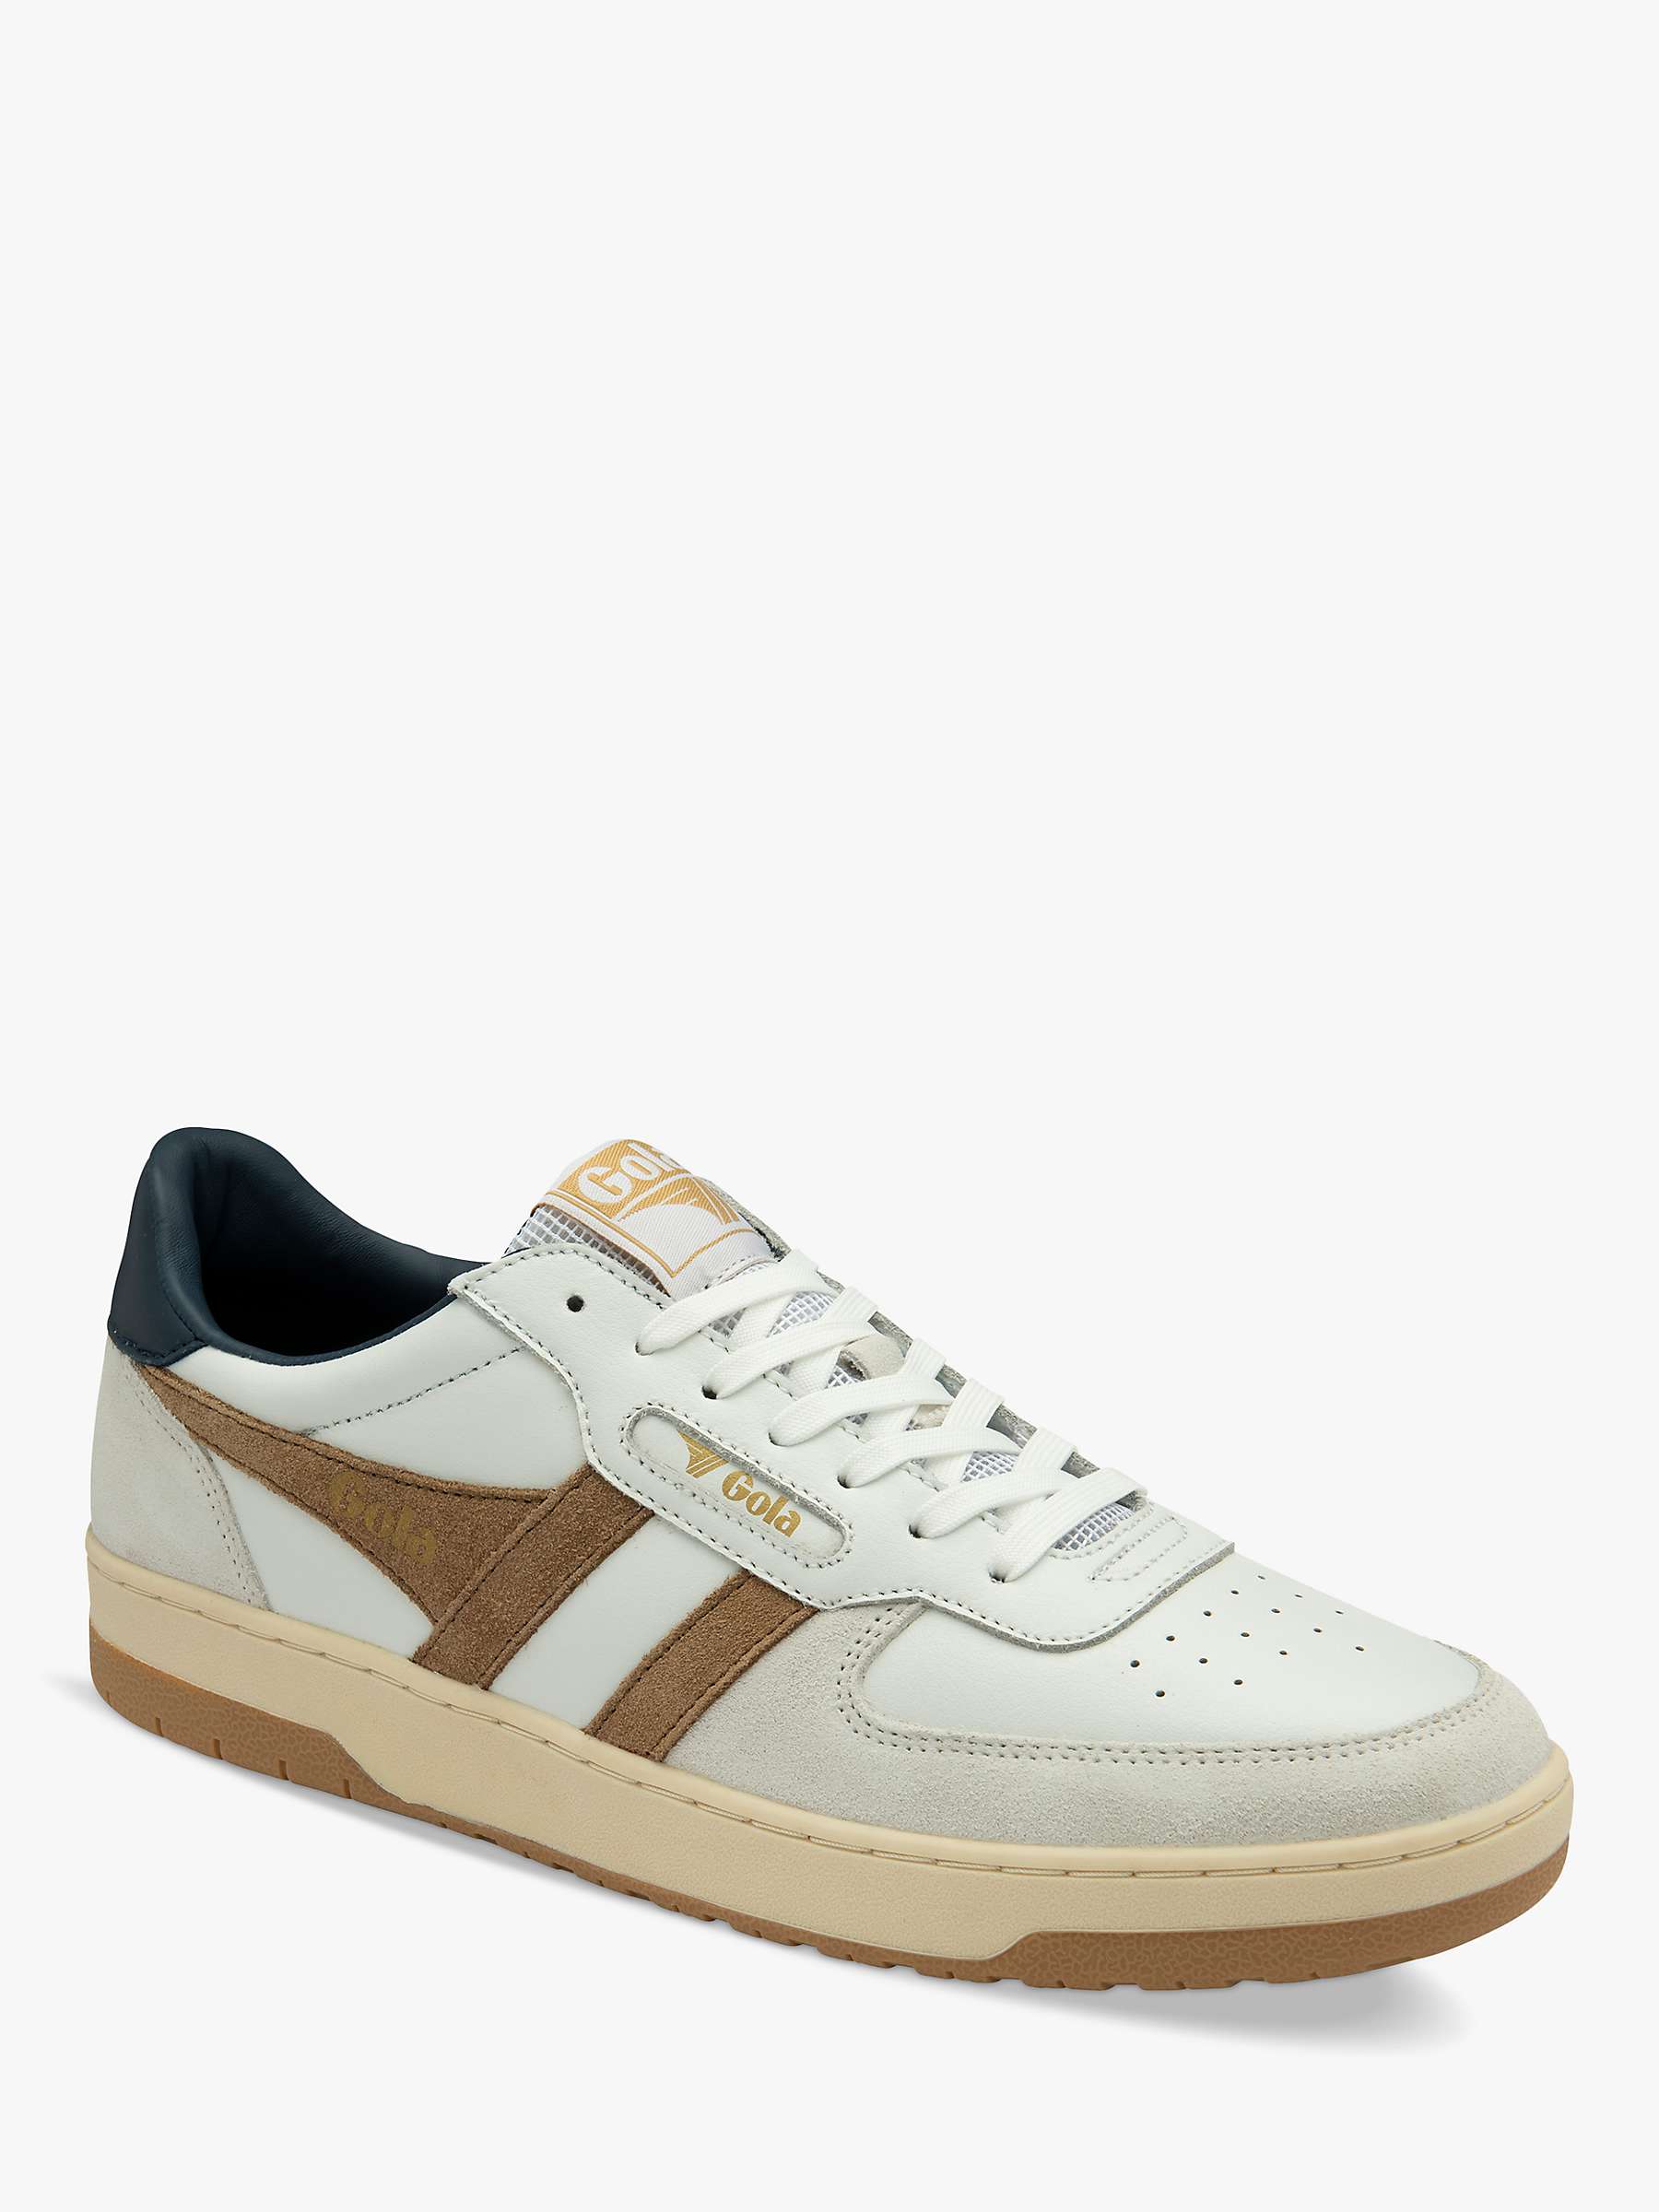 Buy Gola Classics Hawk Leather Lace Up Trainers, White/Tobacco/Navy Online at johnlewis.com